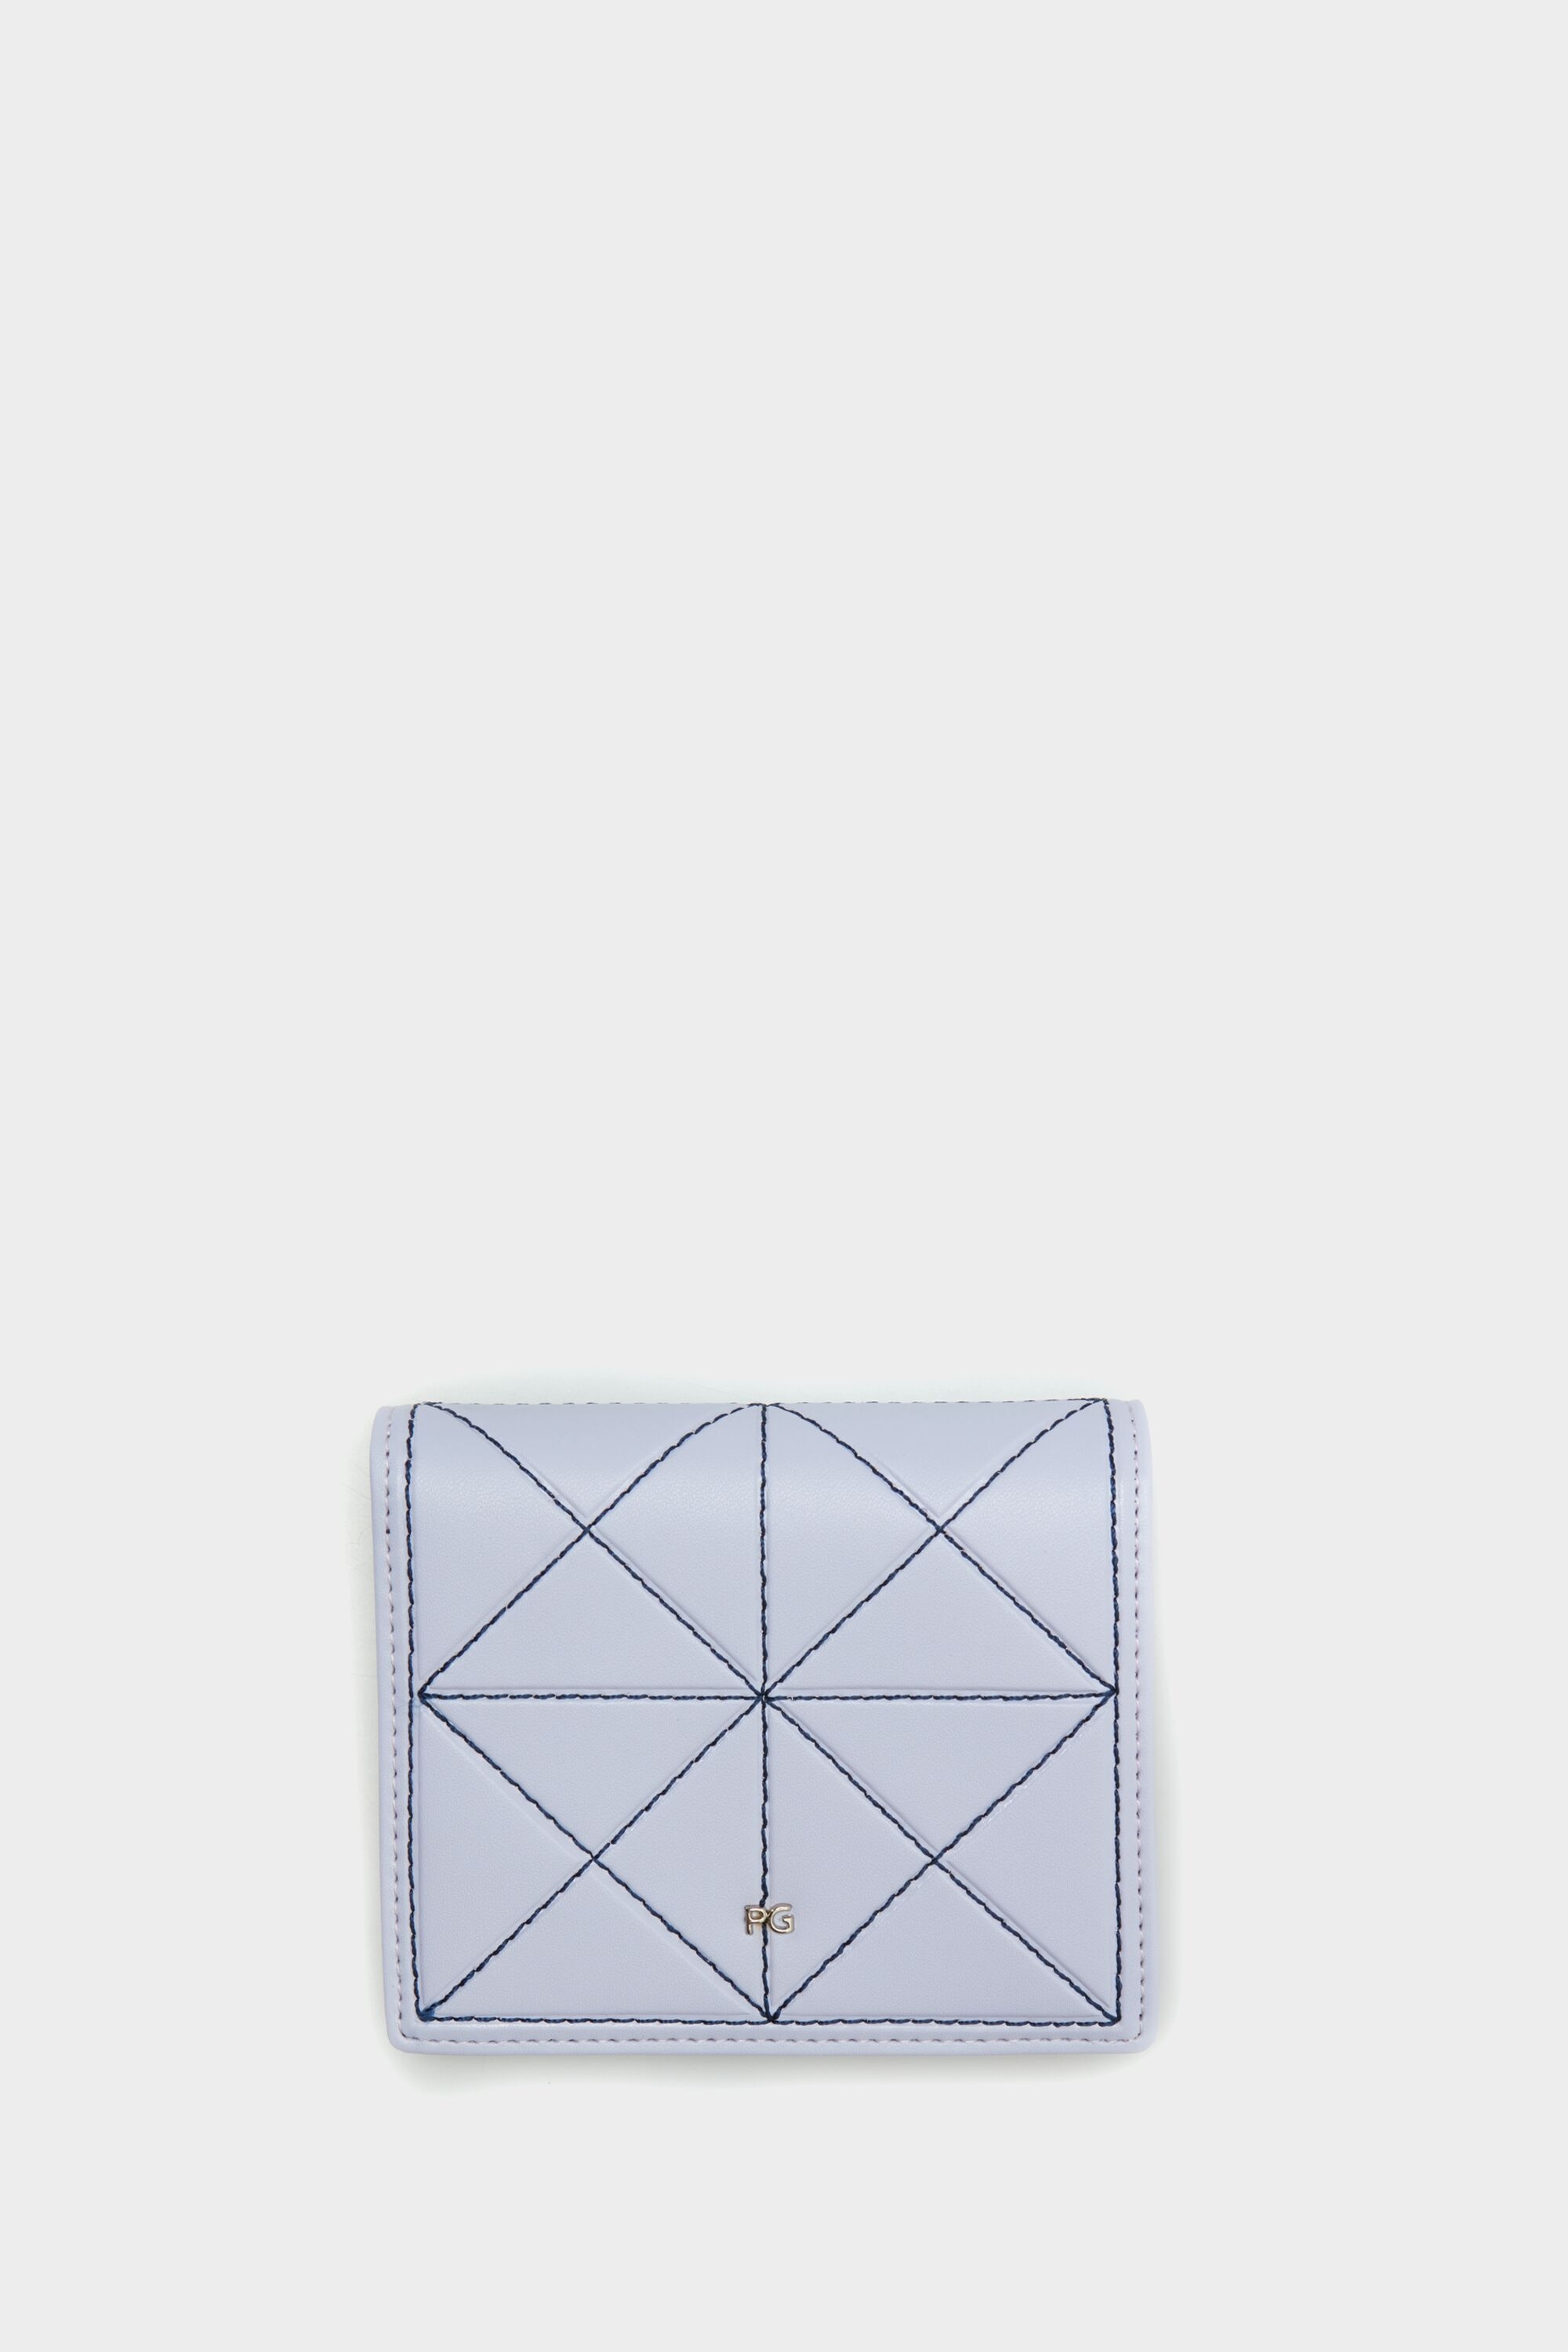 Origami Japanese wallet